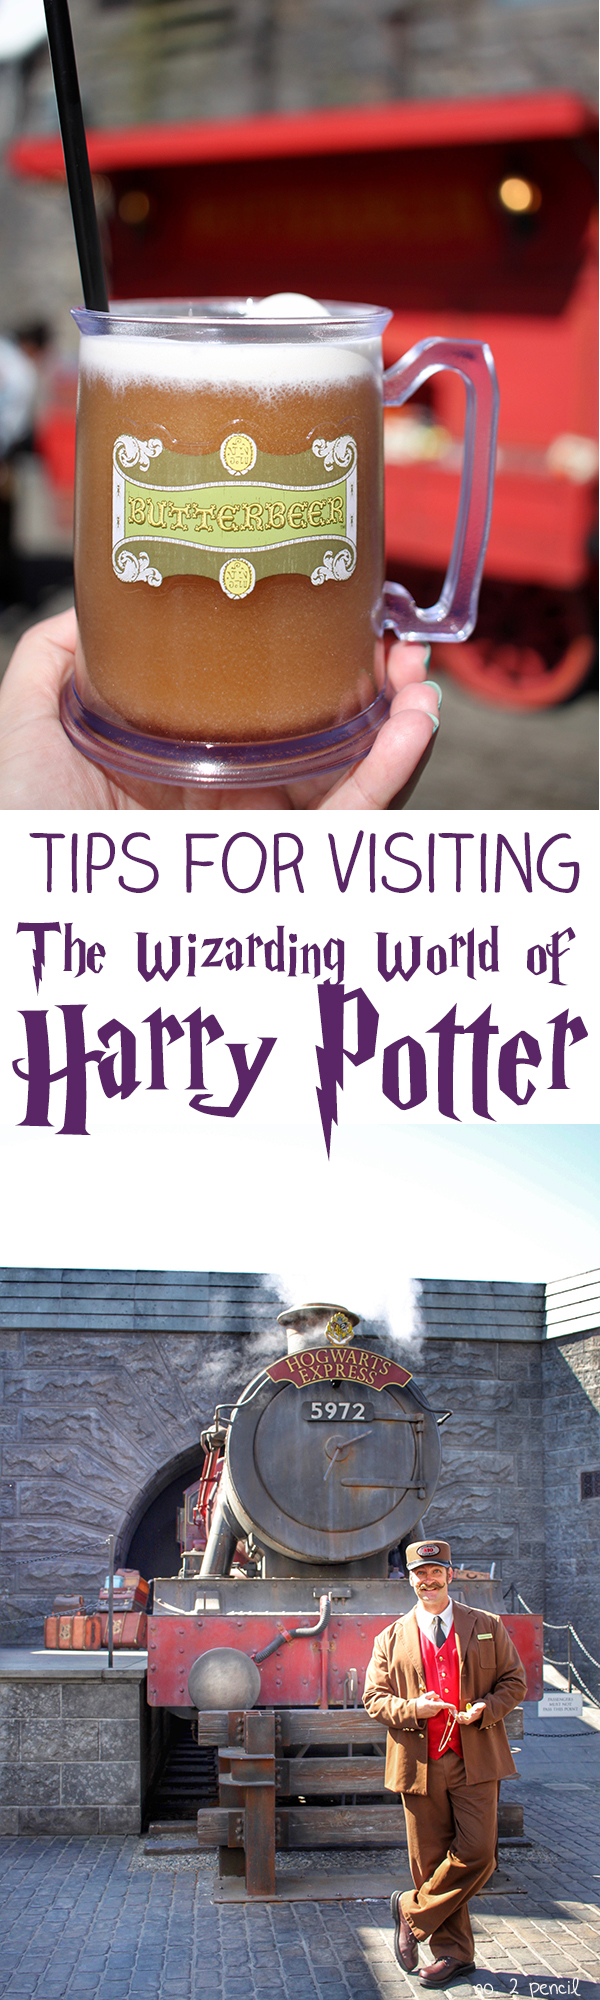 The Wizarding World of Harry Potter Universal Studios Hollywood Tips and Tricks